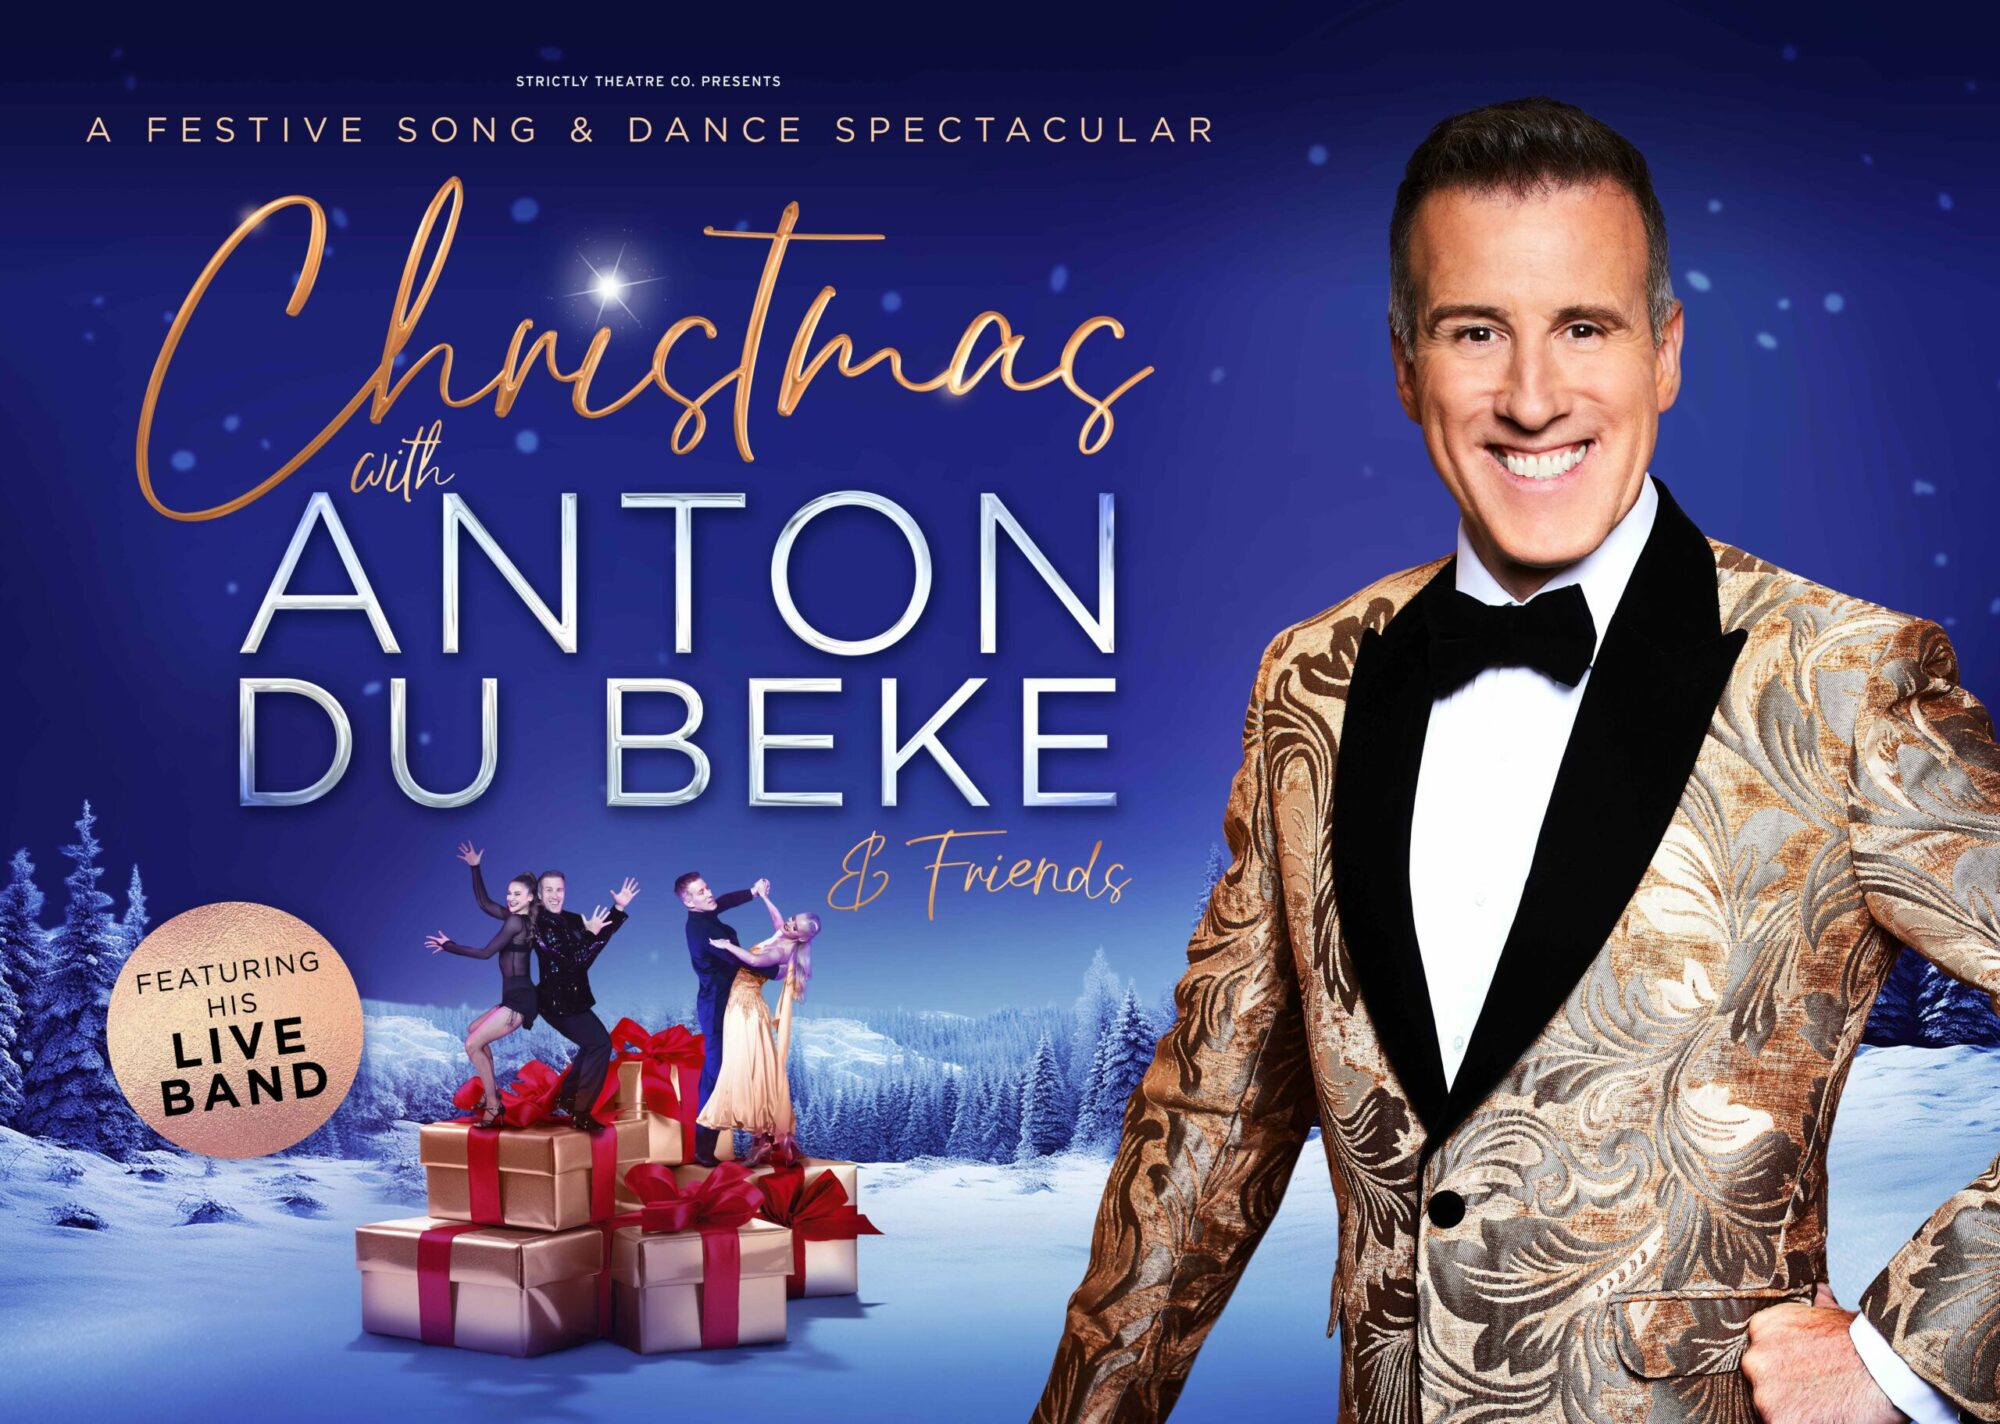 Image name Christmas with Anton Du Beke at York Barbican York scaled the 23 image from the post Christmas with Anton Du Beke at York Barbican, York in Yorkshire.com.